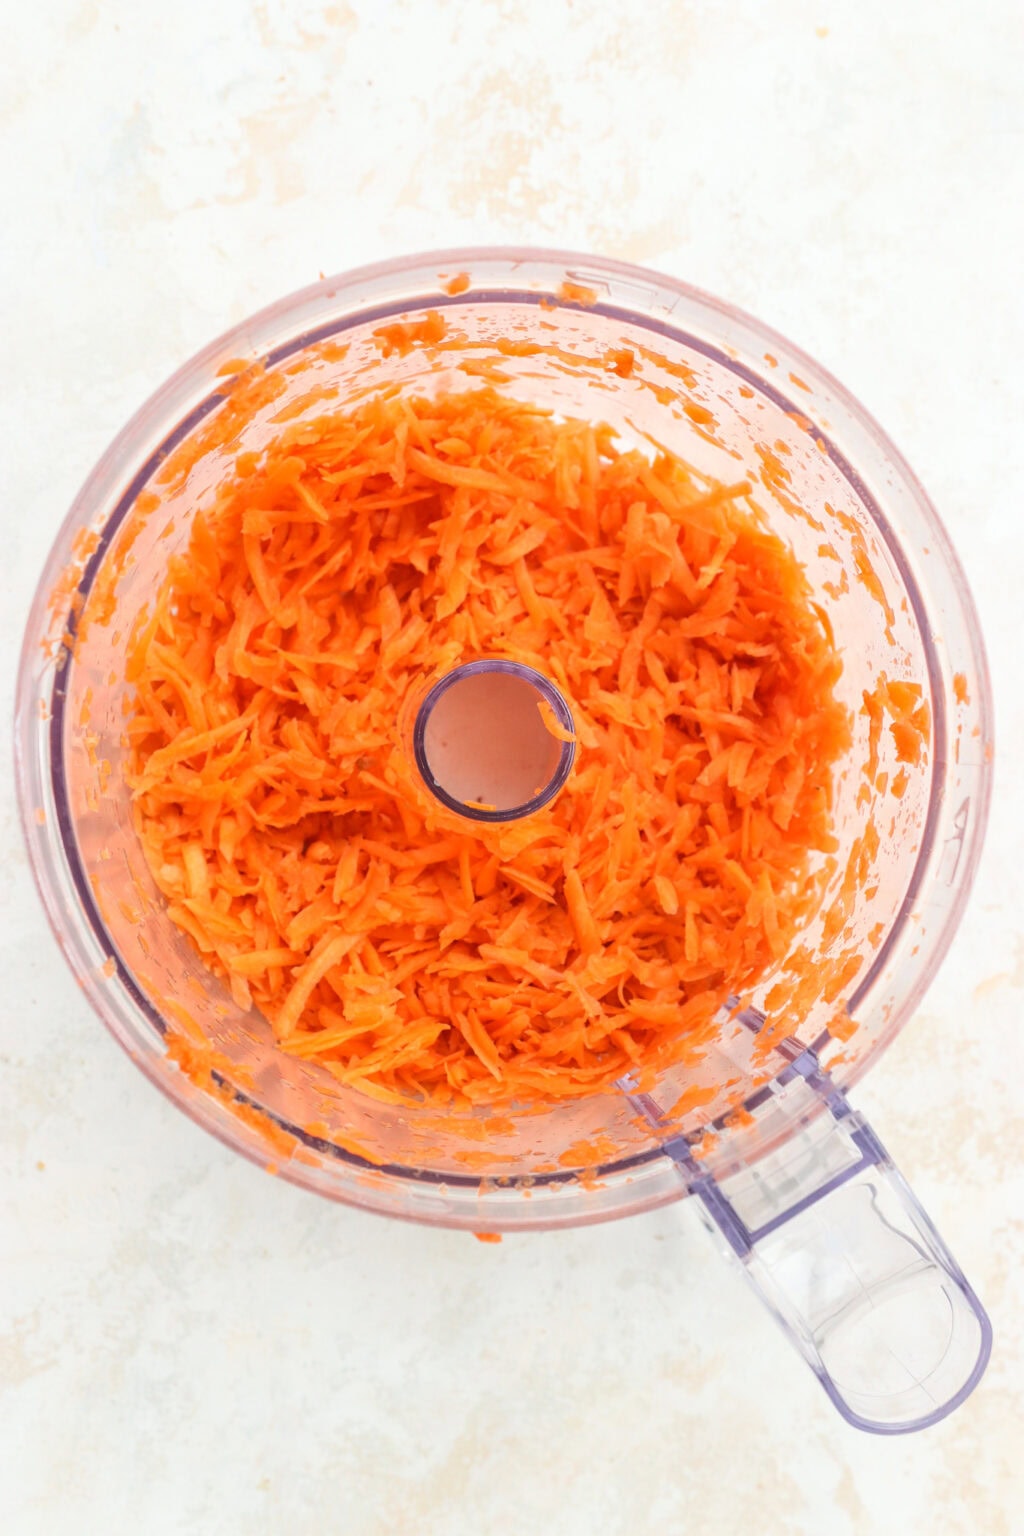 Shredded carrots in a good processor for quick pickled carrots